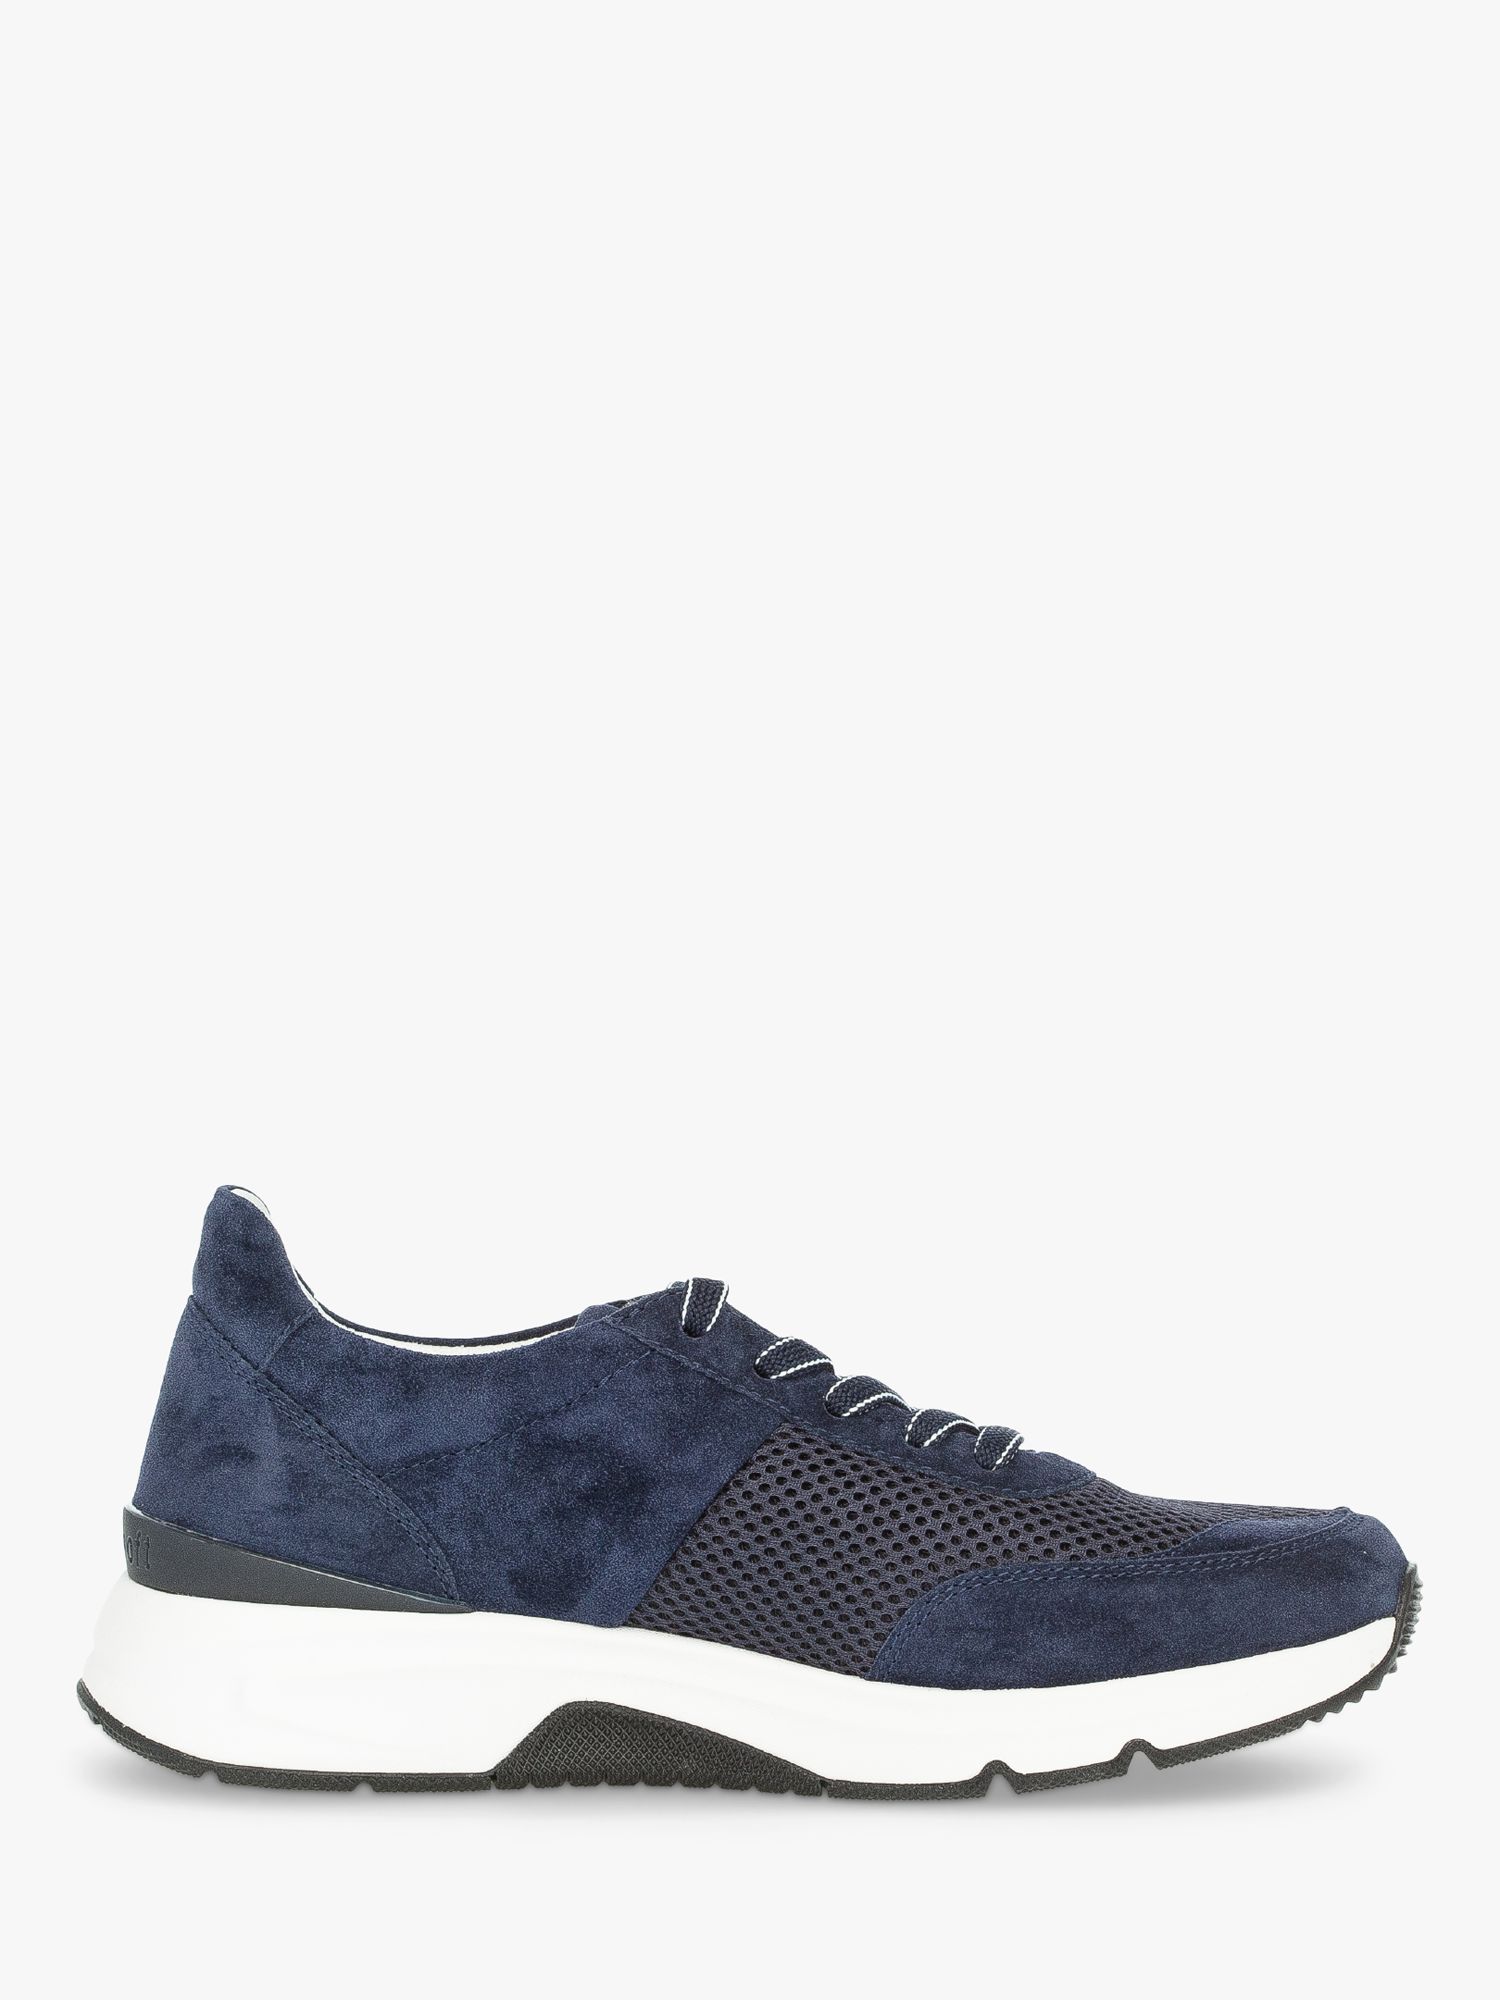 Gabor Aloe Rollingsoft Trainers, Navy at John Lewis & Partners